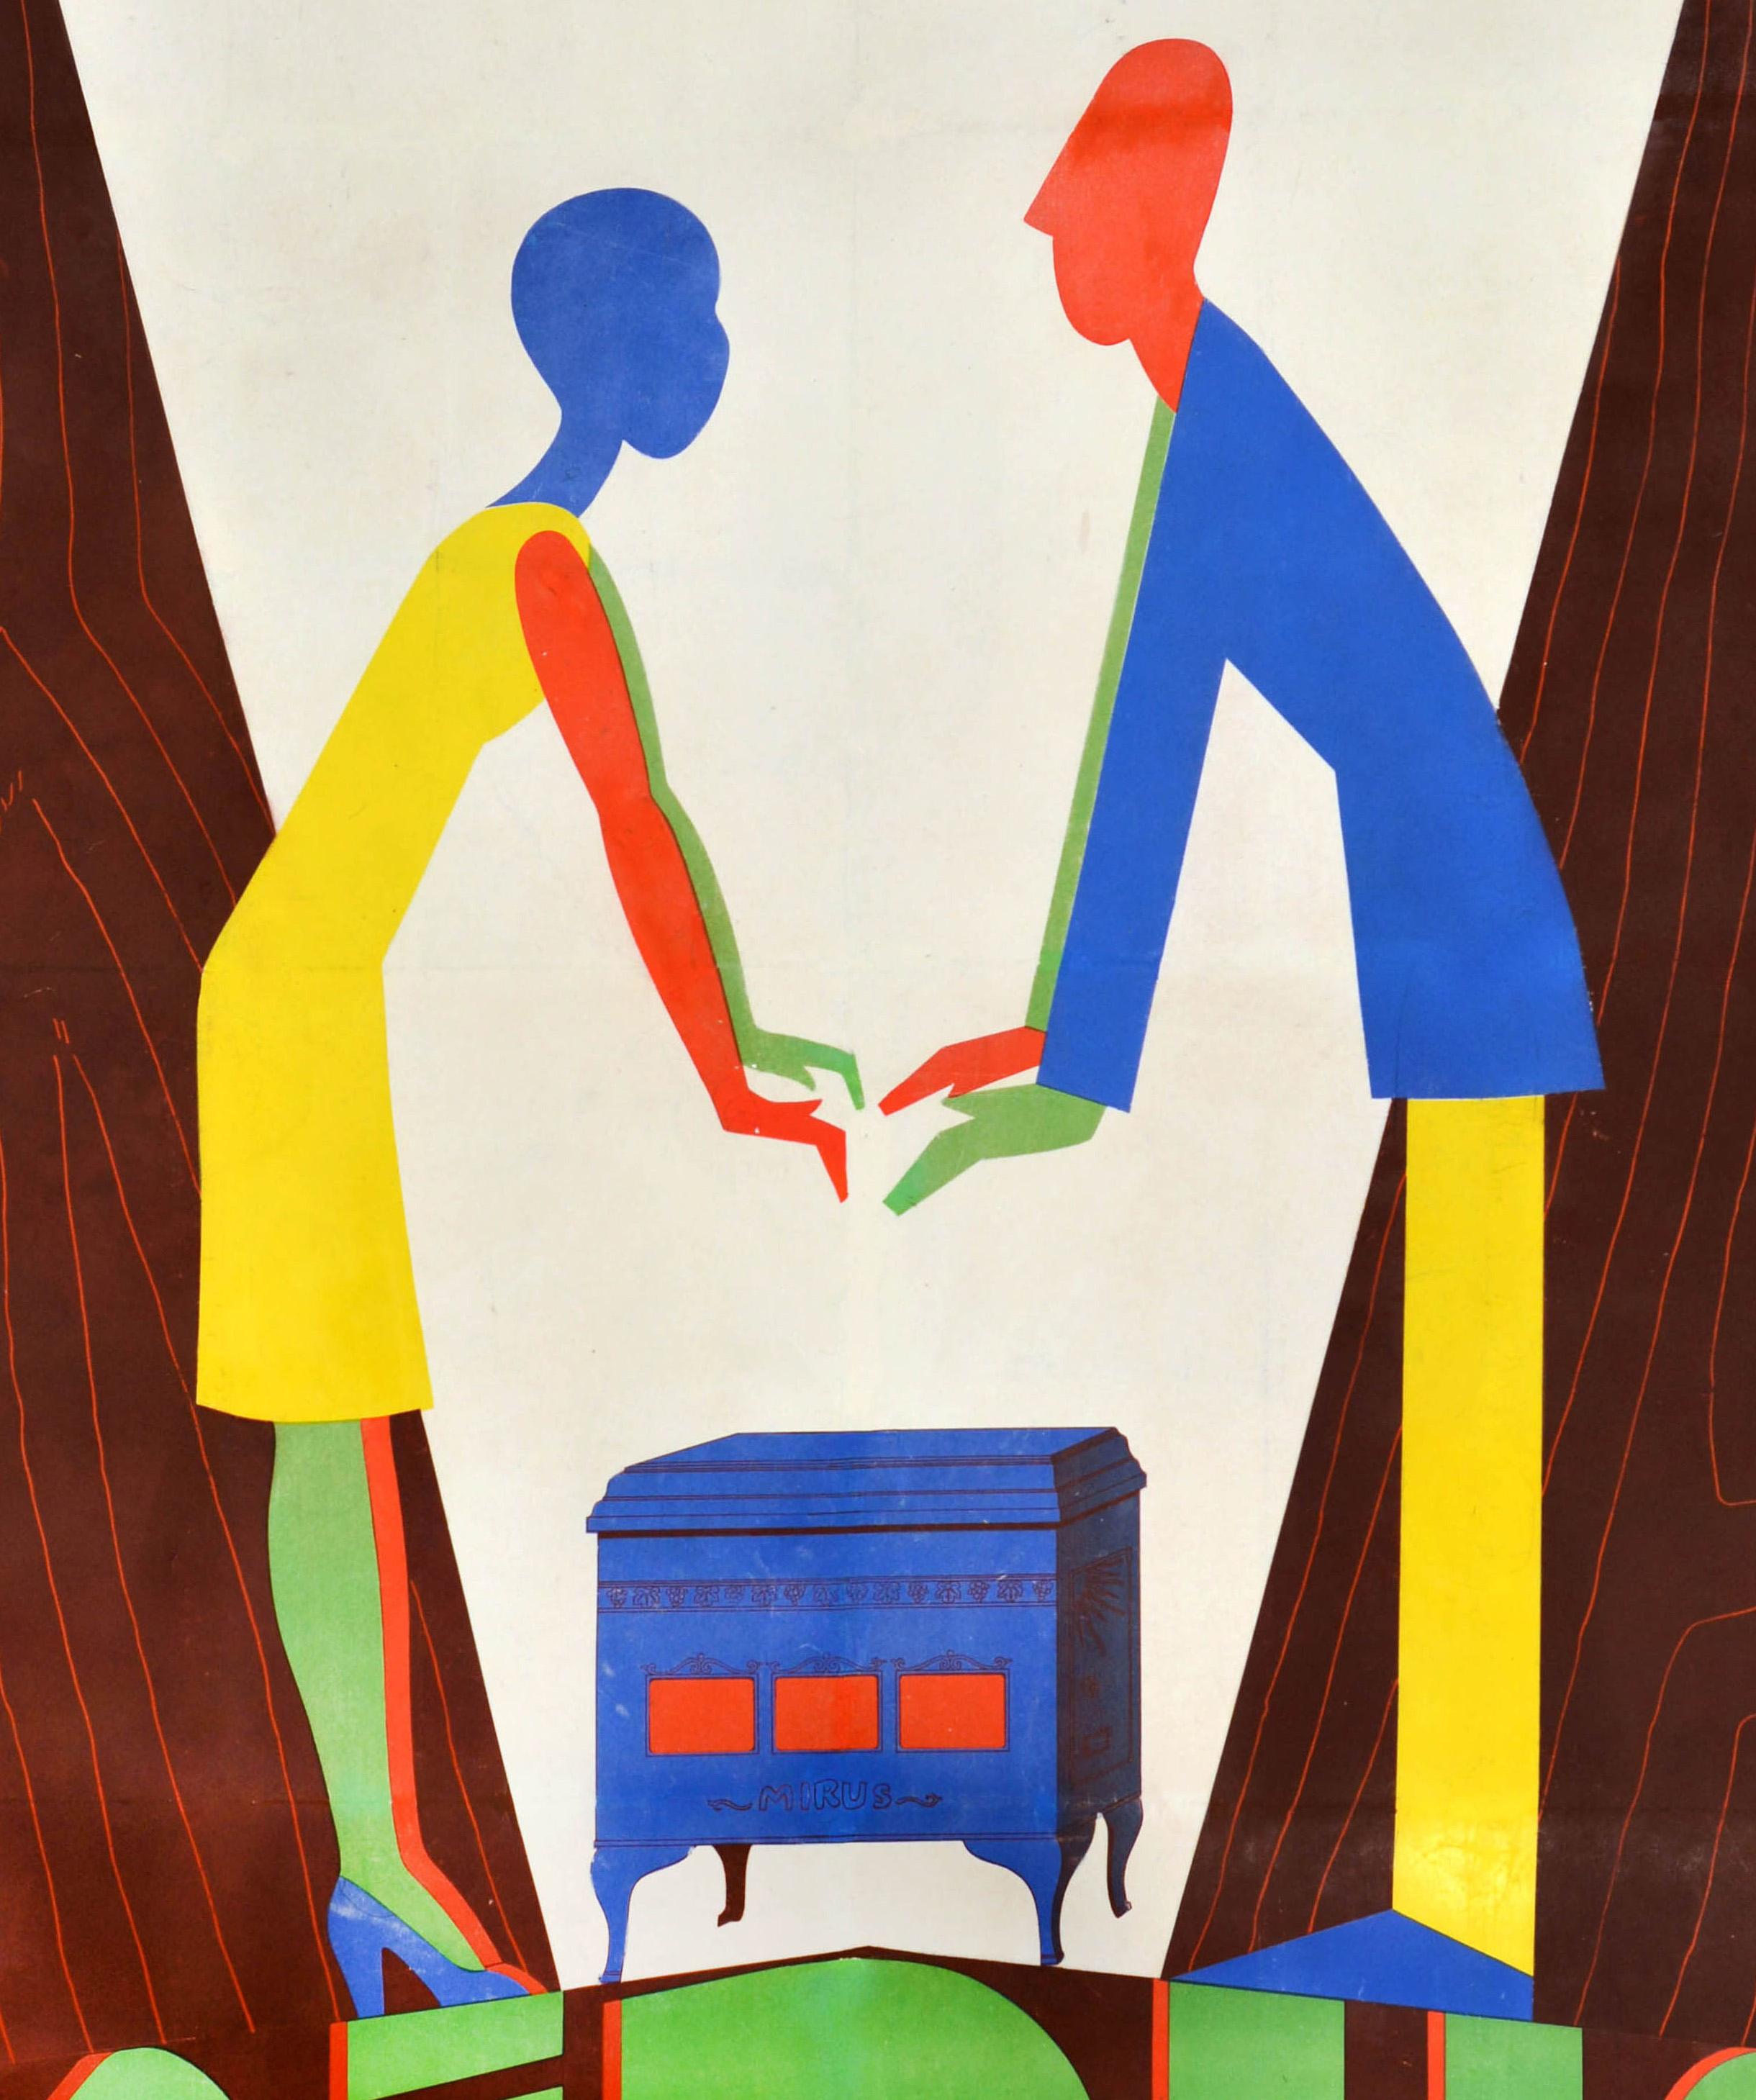 Original antique advertising poster for Mirus poele a bois / wood burning heaters featuring a colourful stylised illustration of a lady and a man warming their hands over the stove set on a V shaped white and wooden pattern background with the text